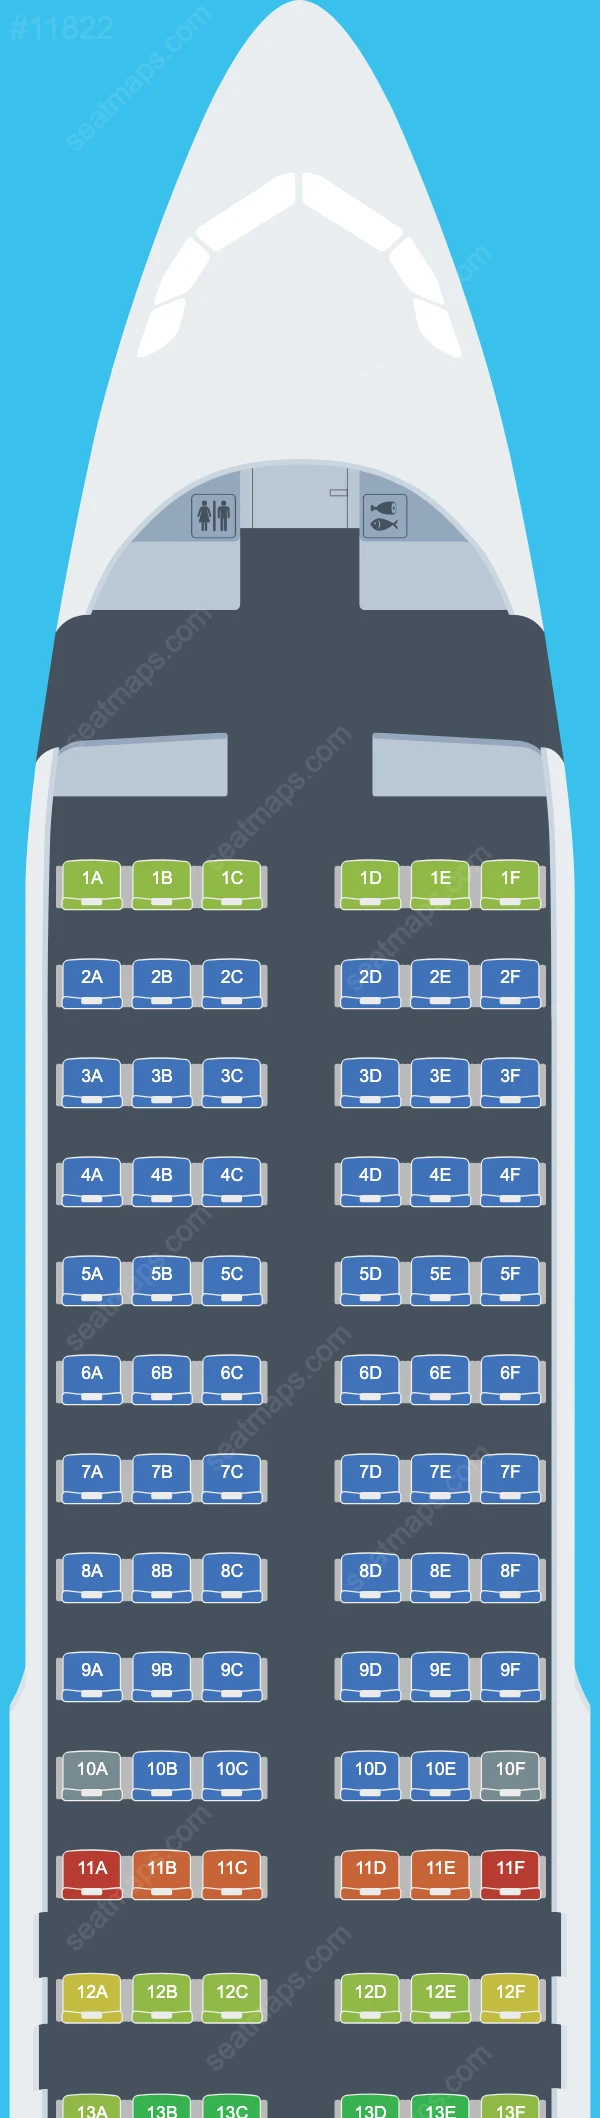 AJet Airbus A320neo aircraft seat map  A320neo